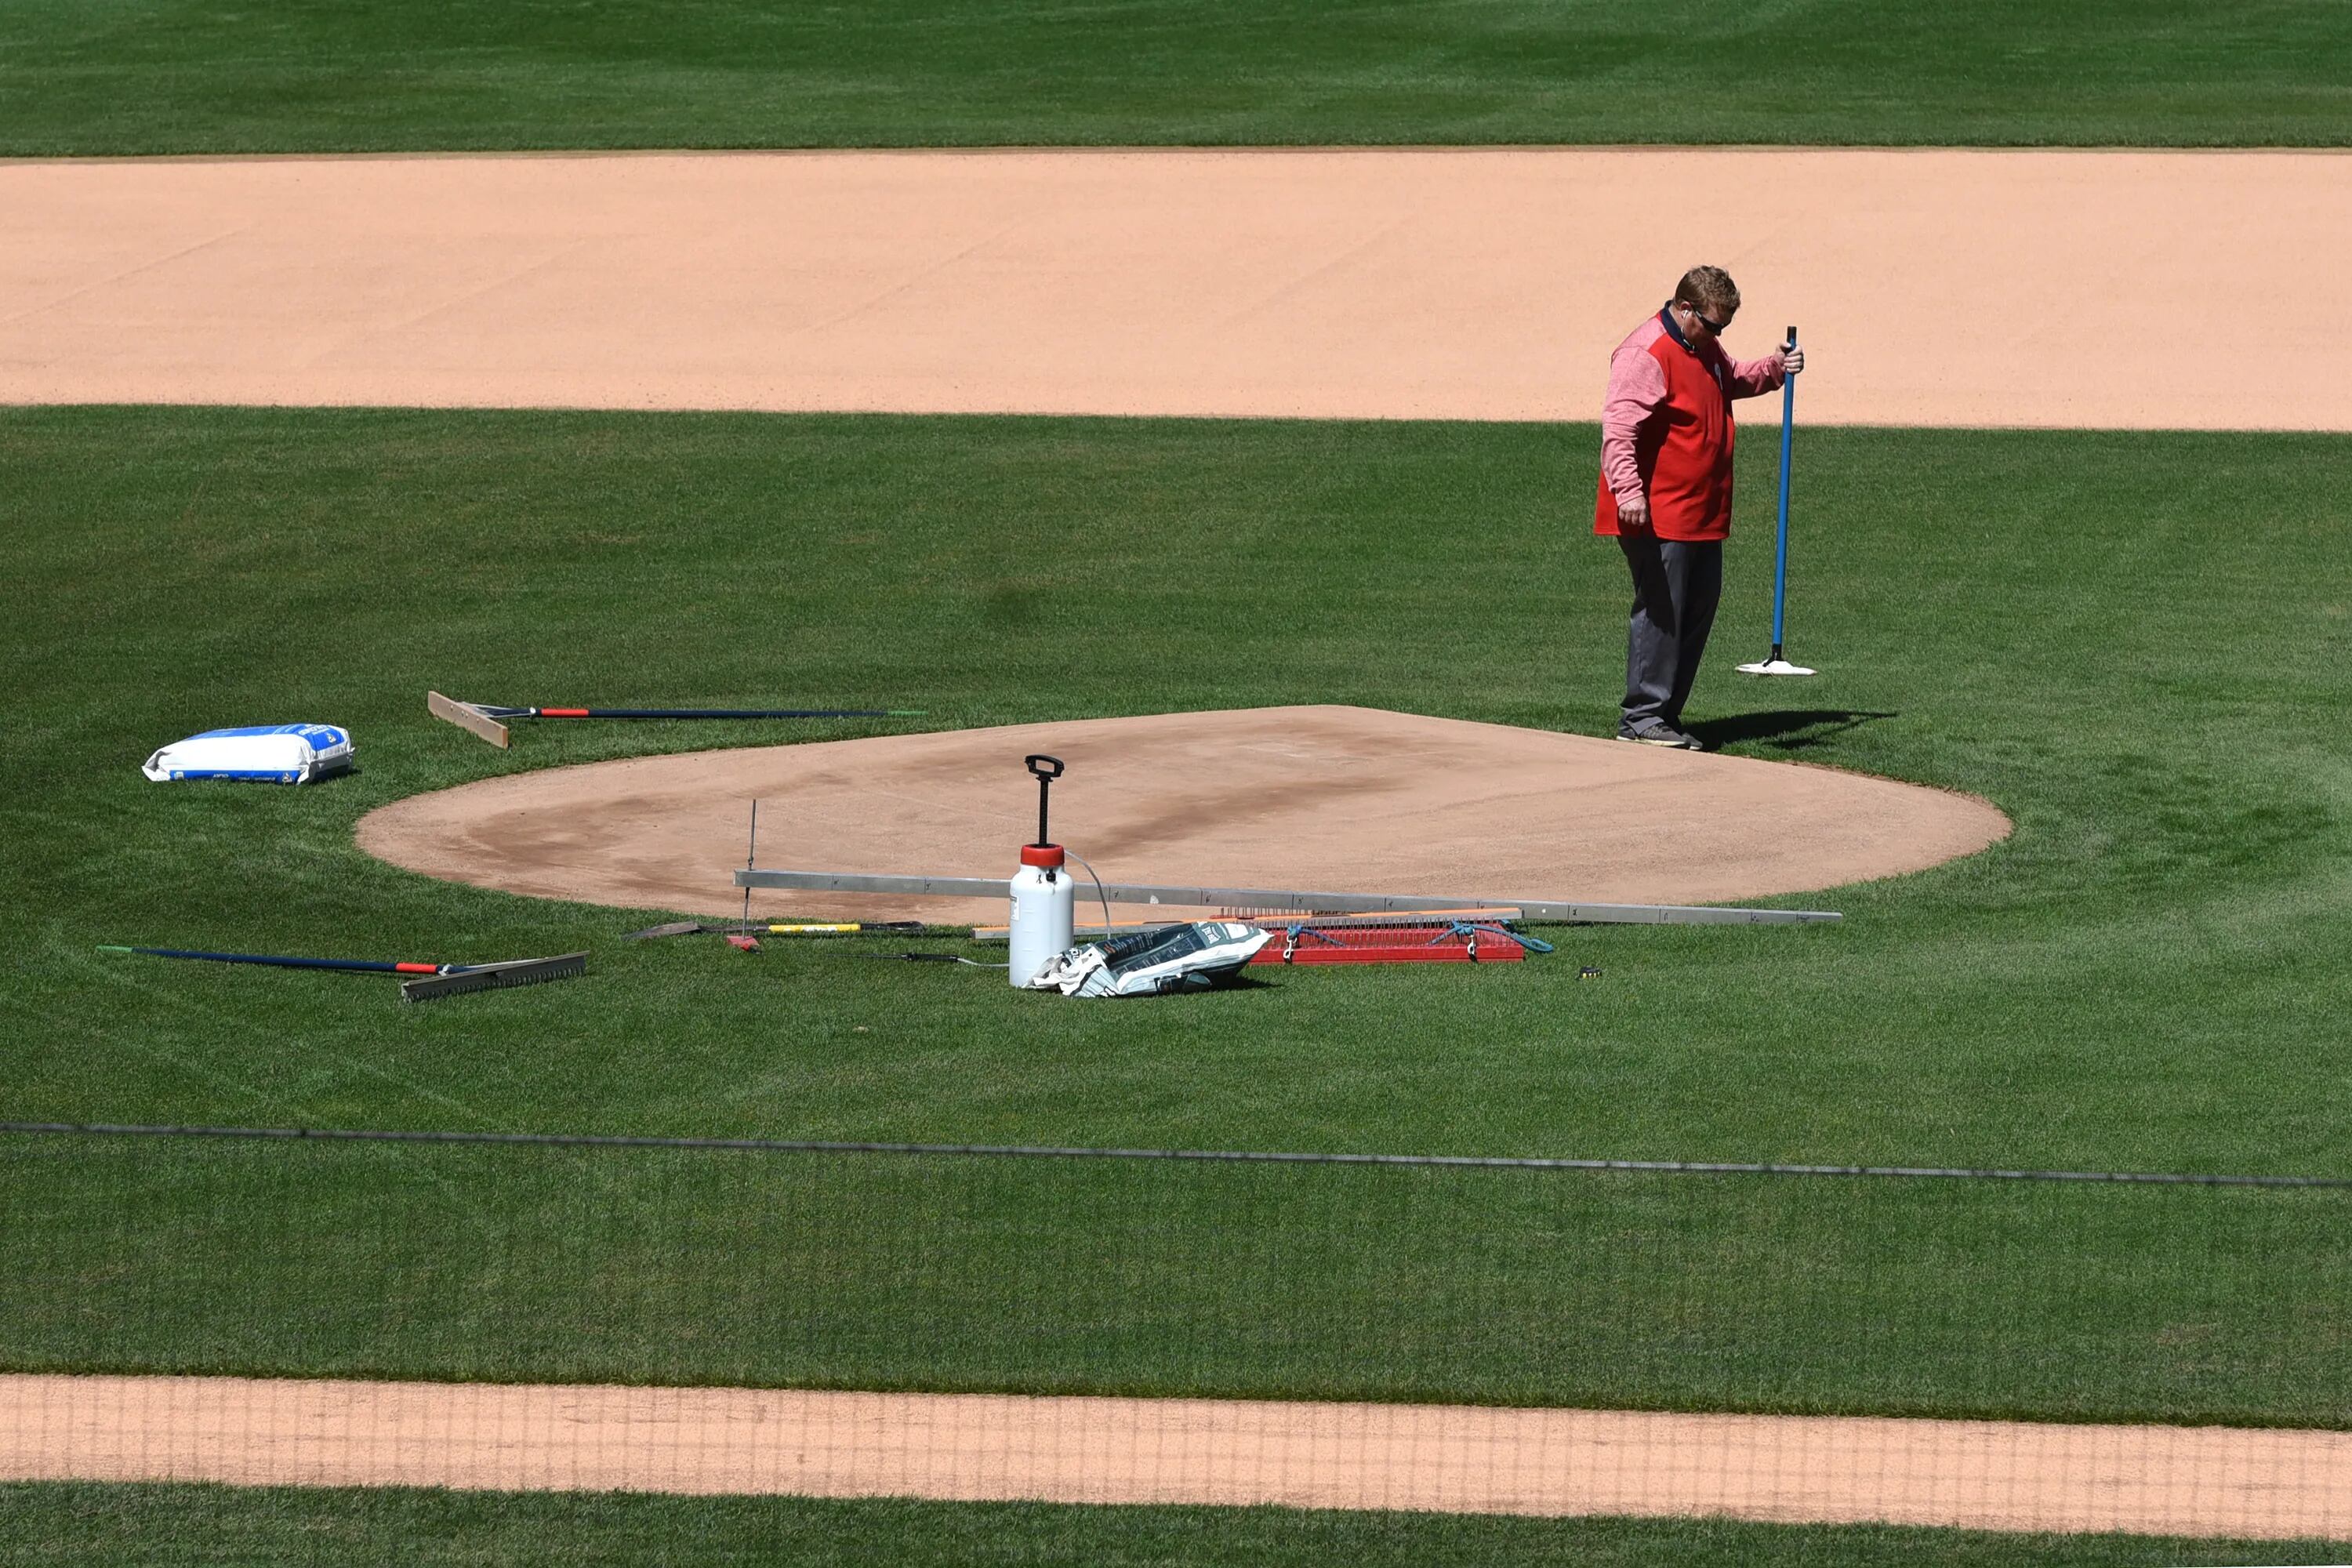 The inside dirt on infield dirt: MLB addressing its 'dirty little